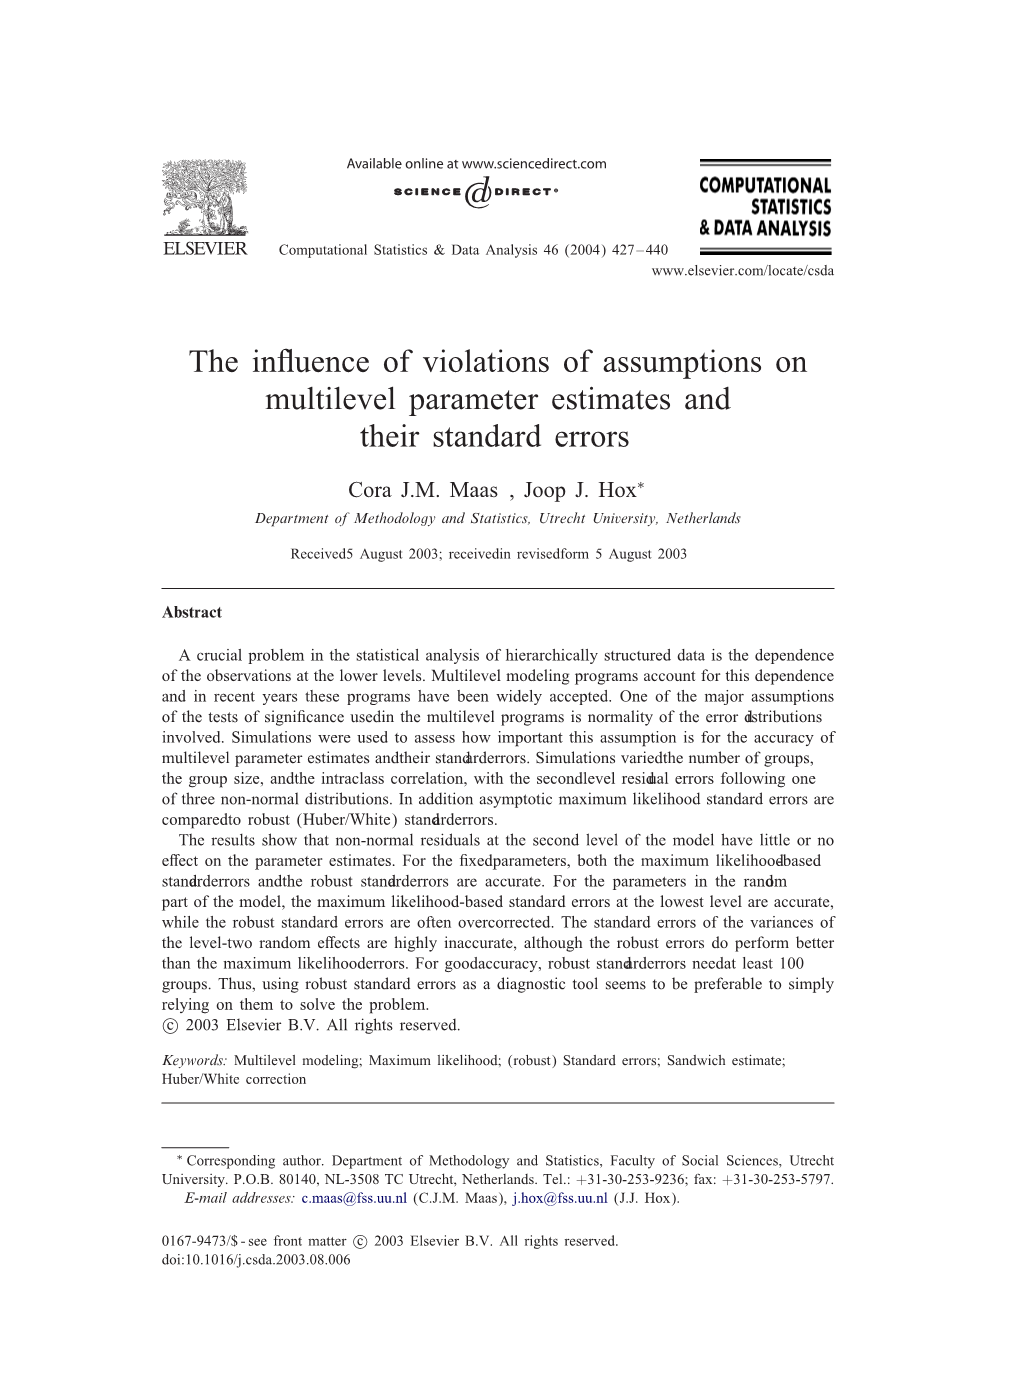 The in Uence of Violations of Assumptions on Multilevel